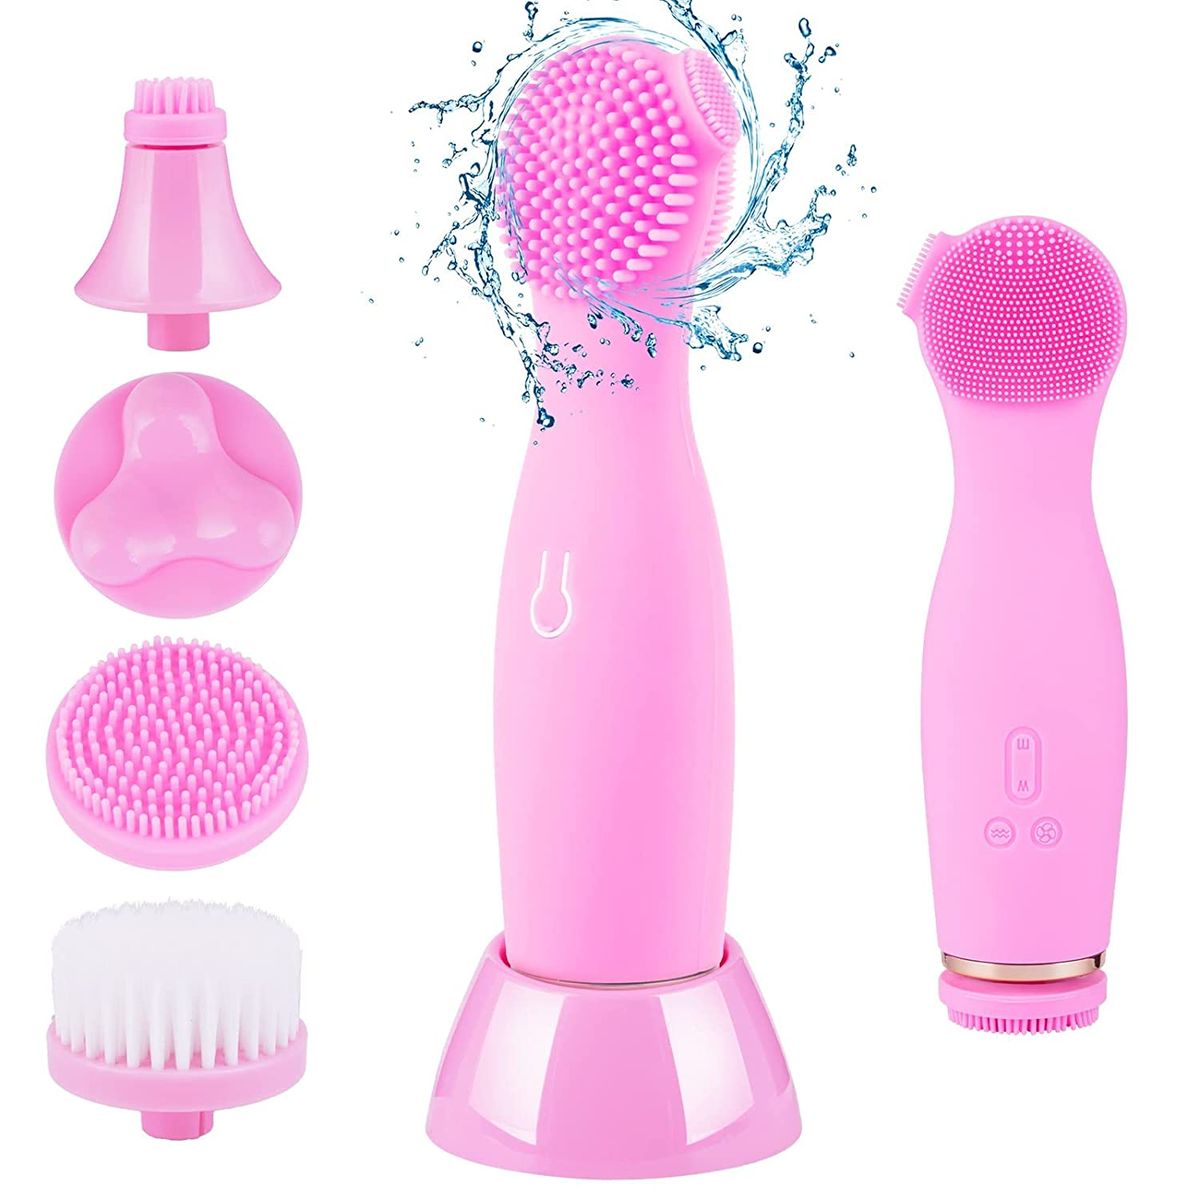 WanderLand 2-1 Facial Cleansing Brush, Waterproof Spin & Sonic Vibrating Face Brush, Rechargeable 4 Speed Modes, for Gentle Exfoliation, Massage and Deep Cleansing (Pink)